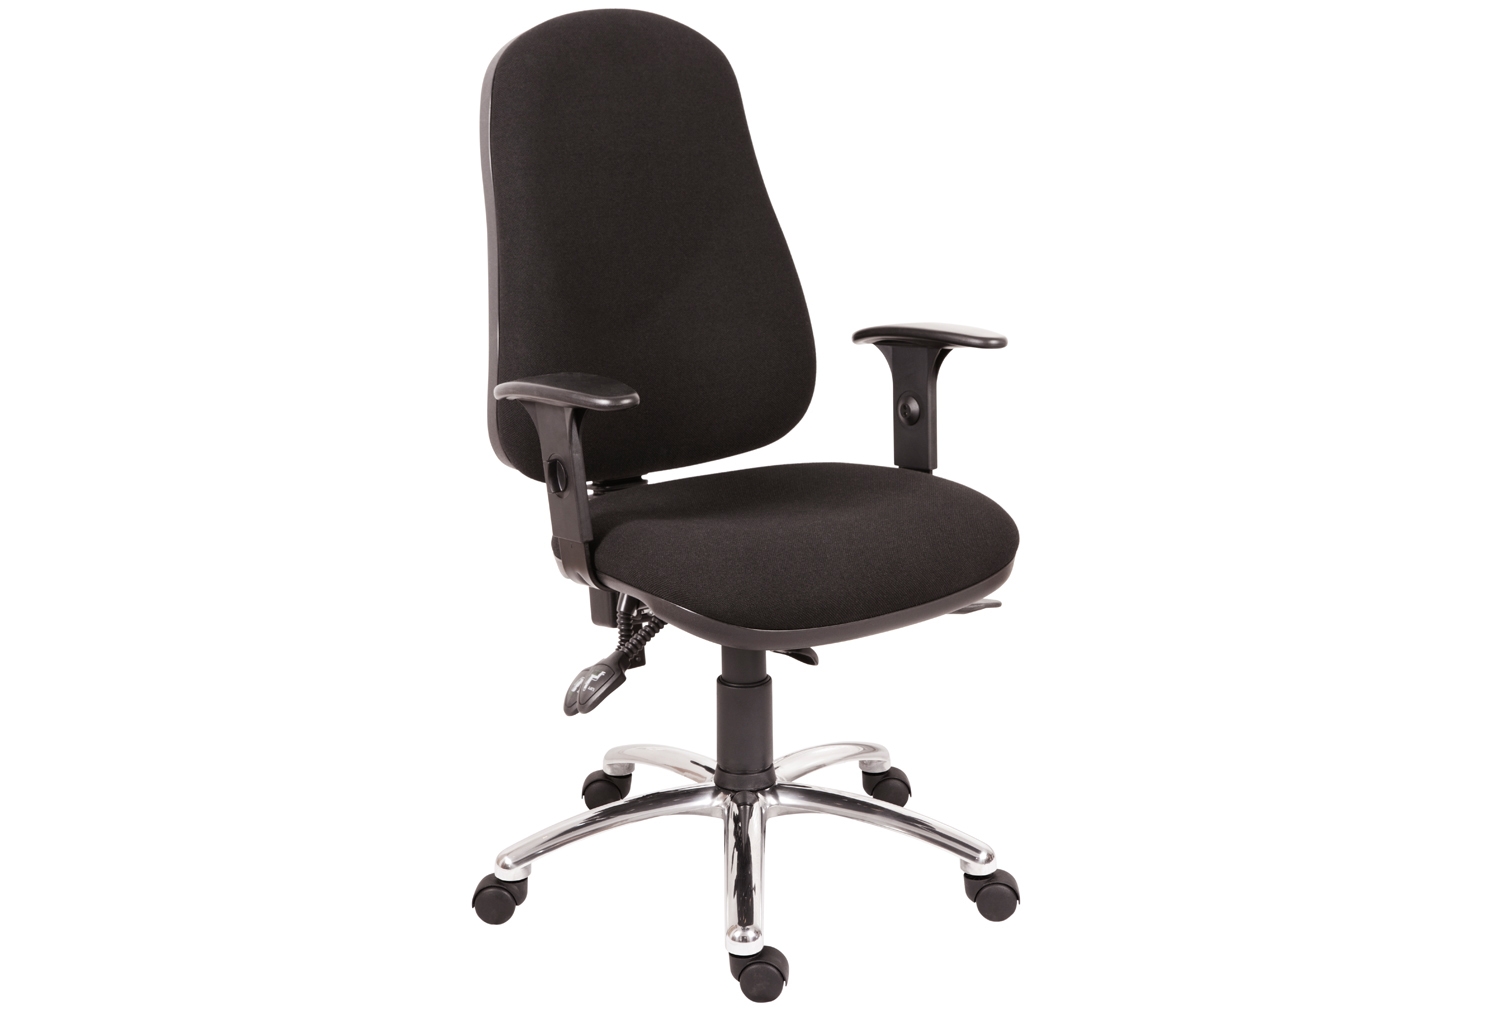 Comfort Ergo Operator Office Chair With Chrome Base (Fabric), Adjustable Arms, Black